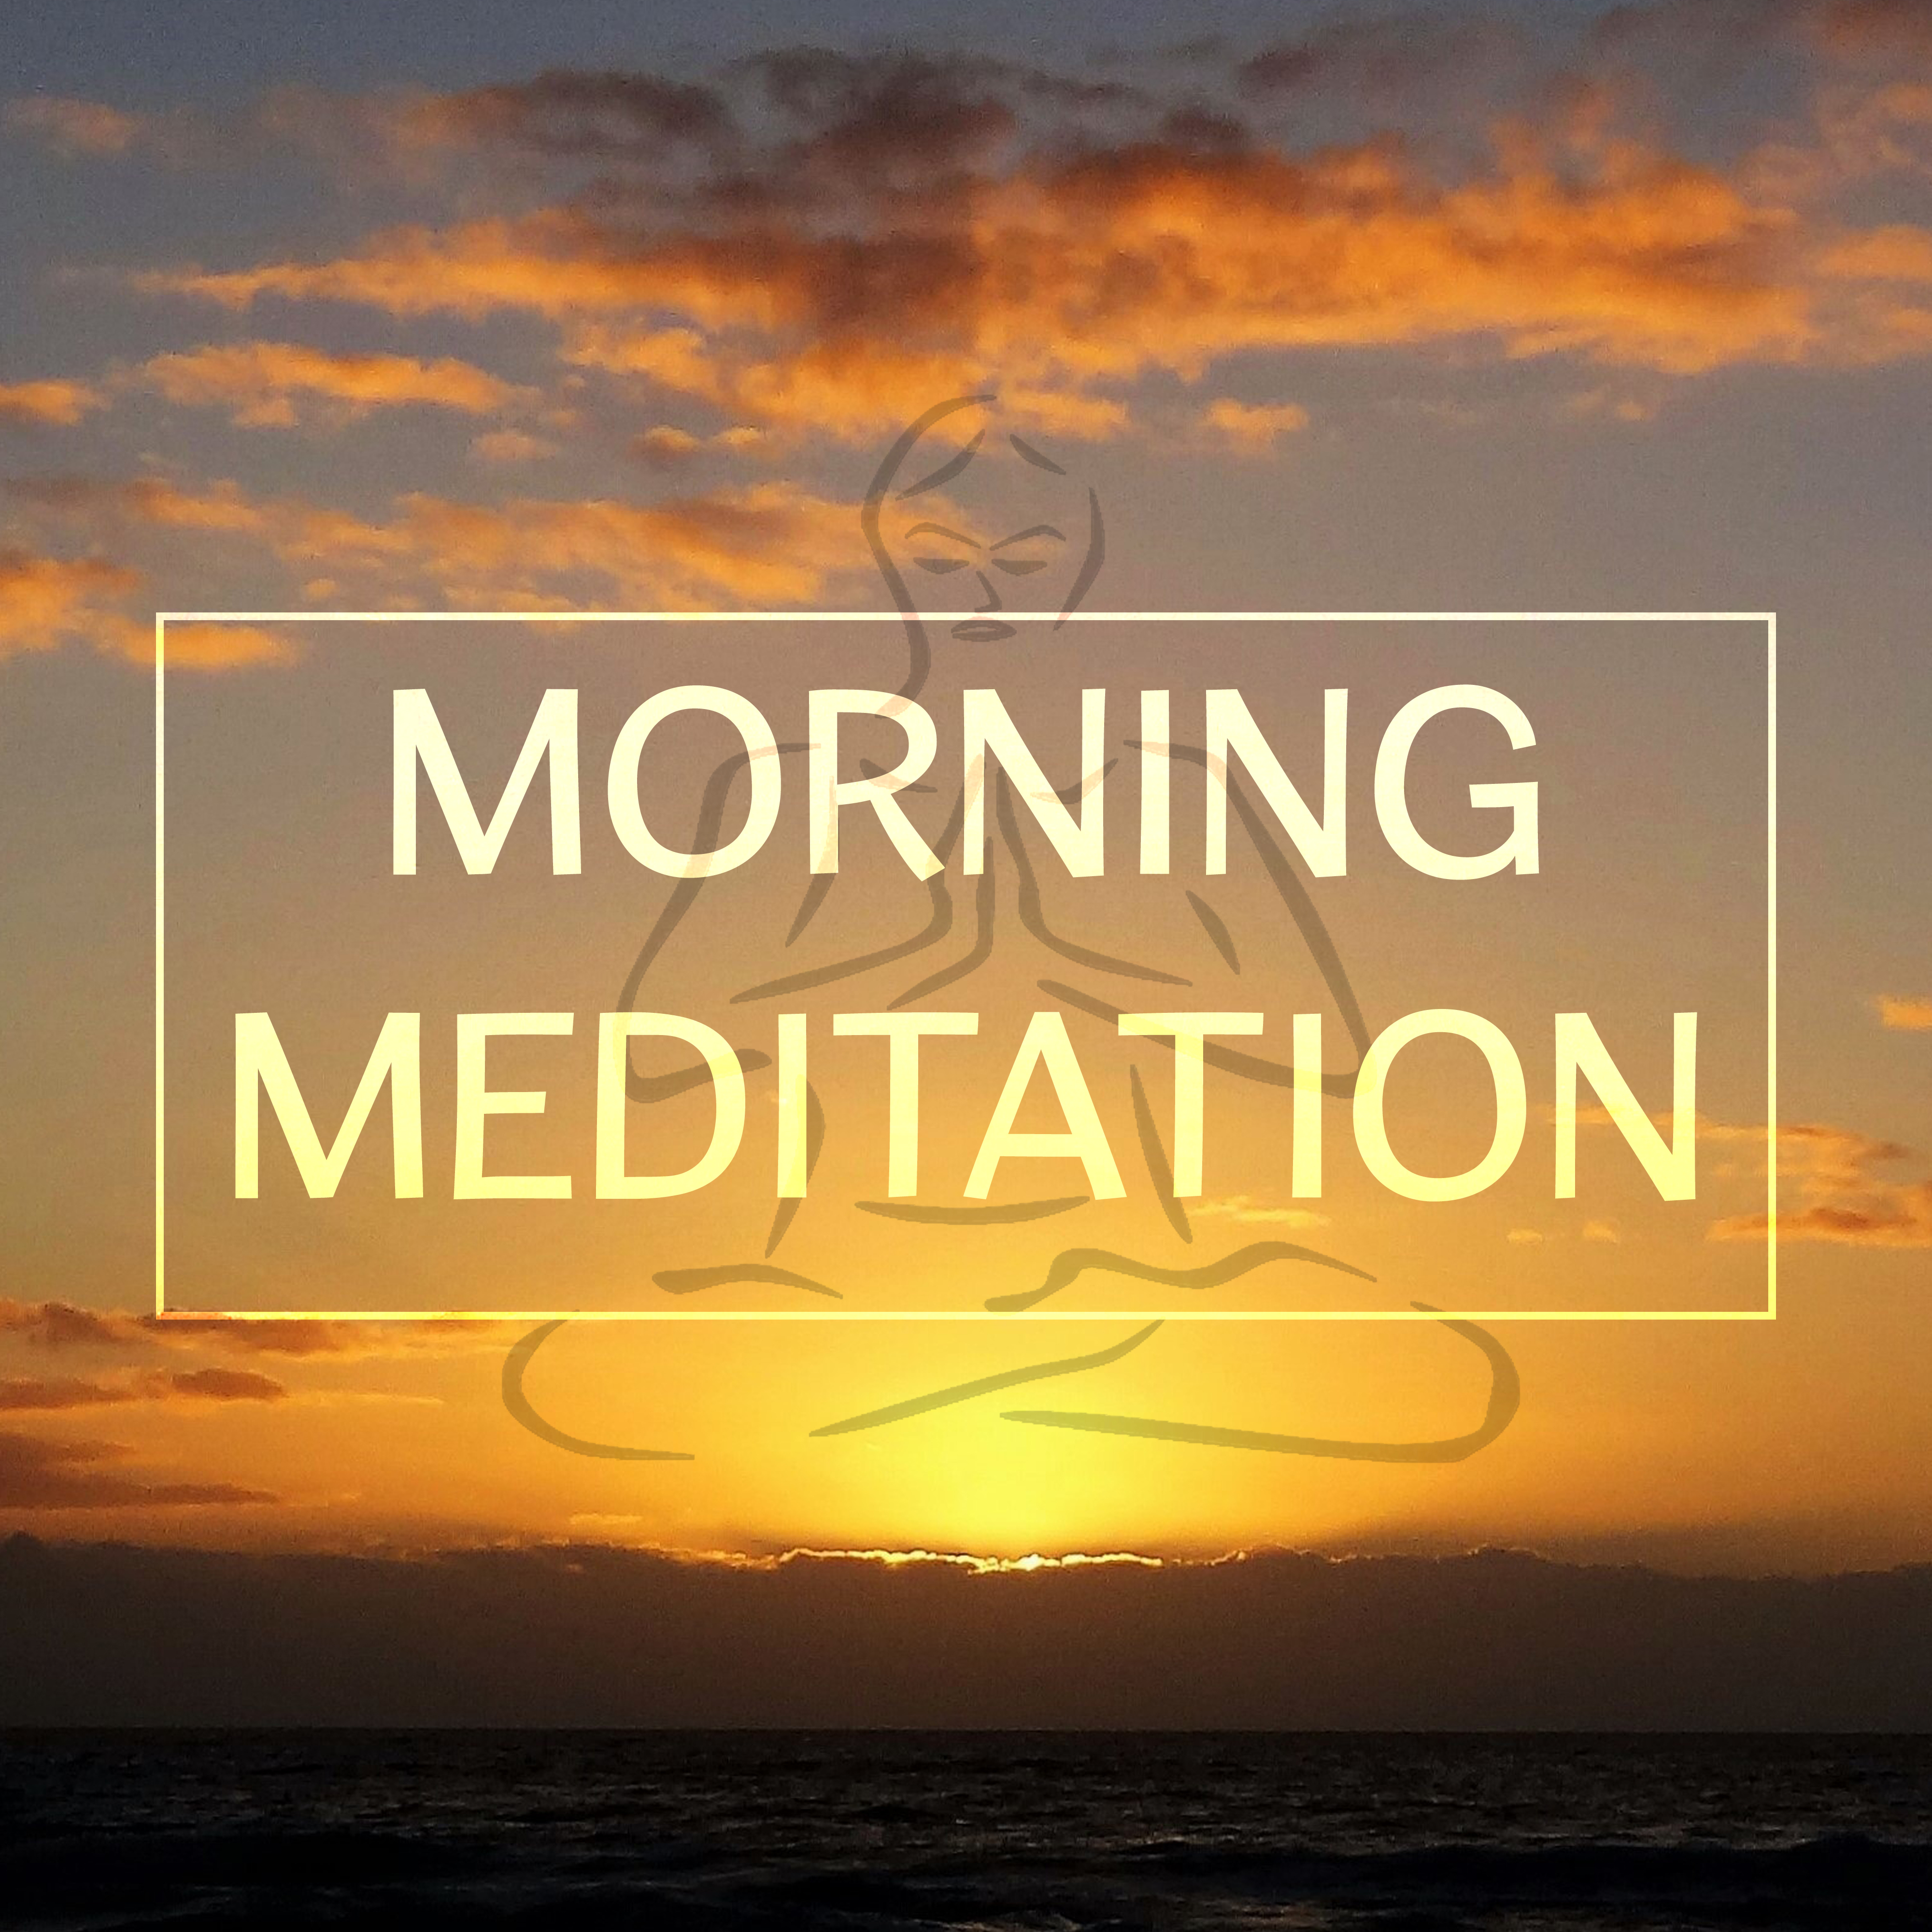 Morning Meditation – Yoga Sounds, Mantra, Zen, Pure Mind, Melodies of Nature for Concentration, Calmness